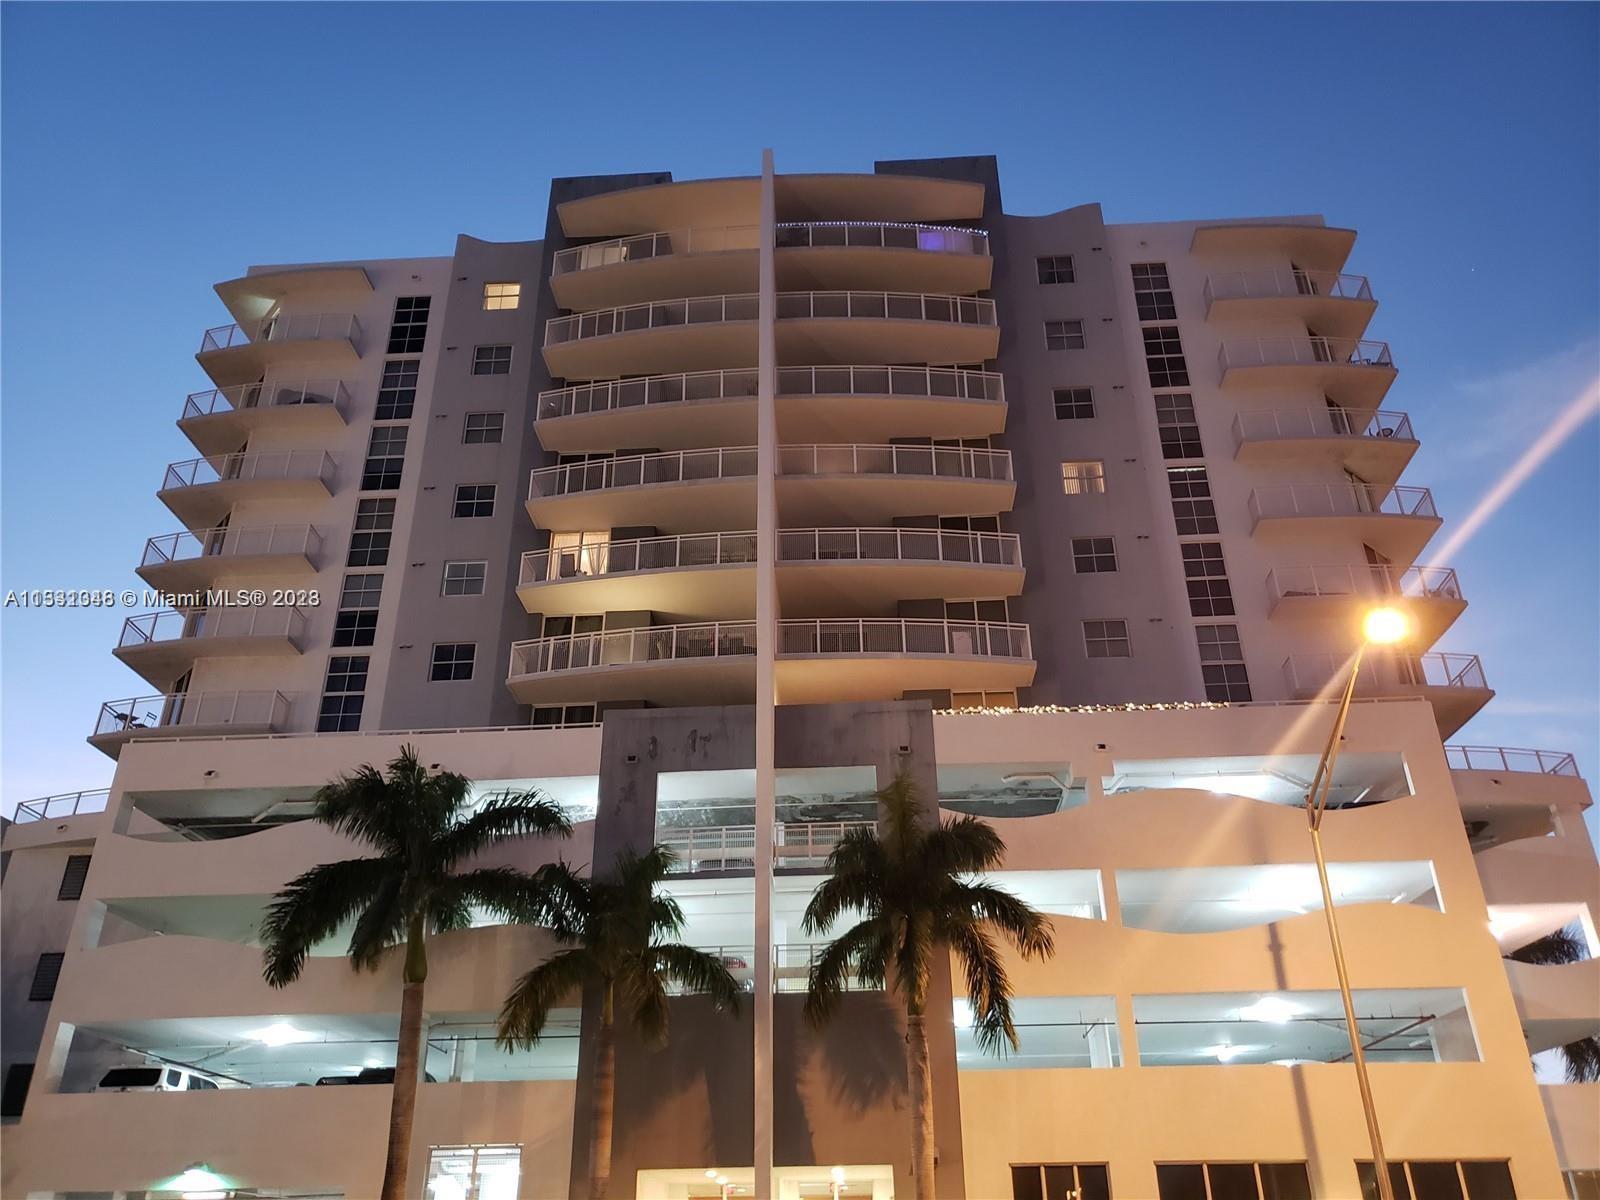 ***Don't miss the opportunity to own this spacious 1 bedroom and 1 bathroom apartment with a big balcony and great view*** 2 assigned parking spaces. Secure garage. Walking distance to Coconut Grove Metrorail Station. Amenities included gym, indoor pool and lounge area. New A/C. Perfect for investors or to end user.